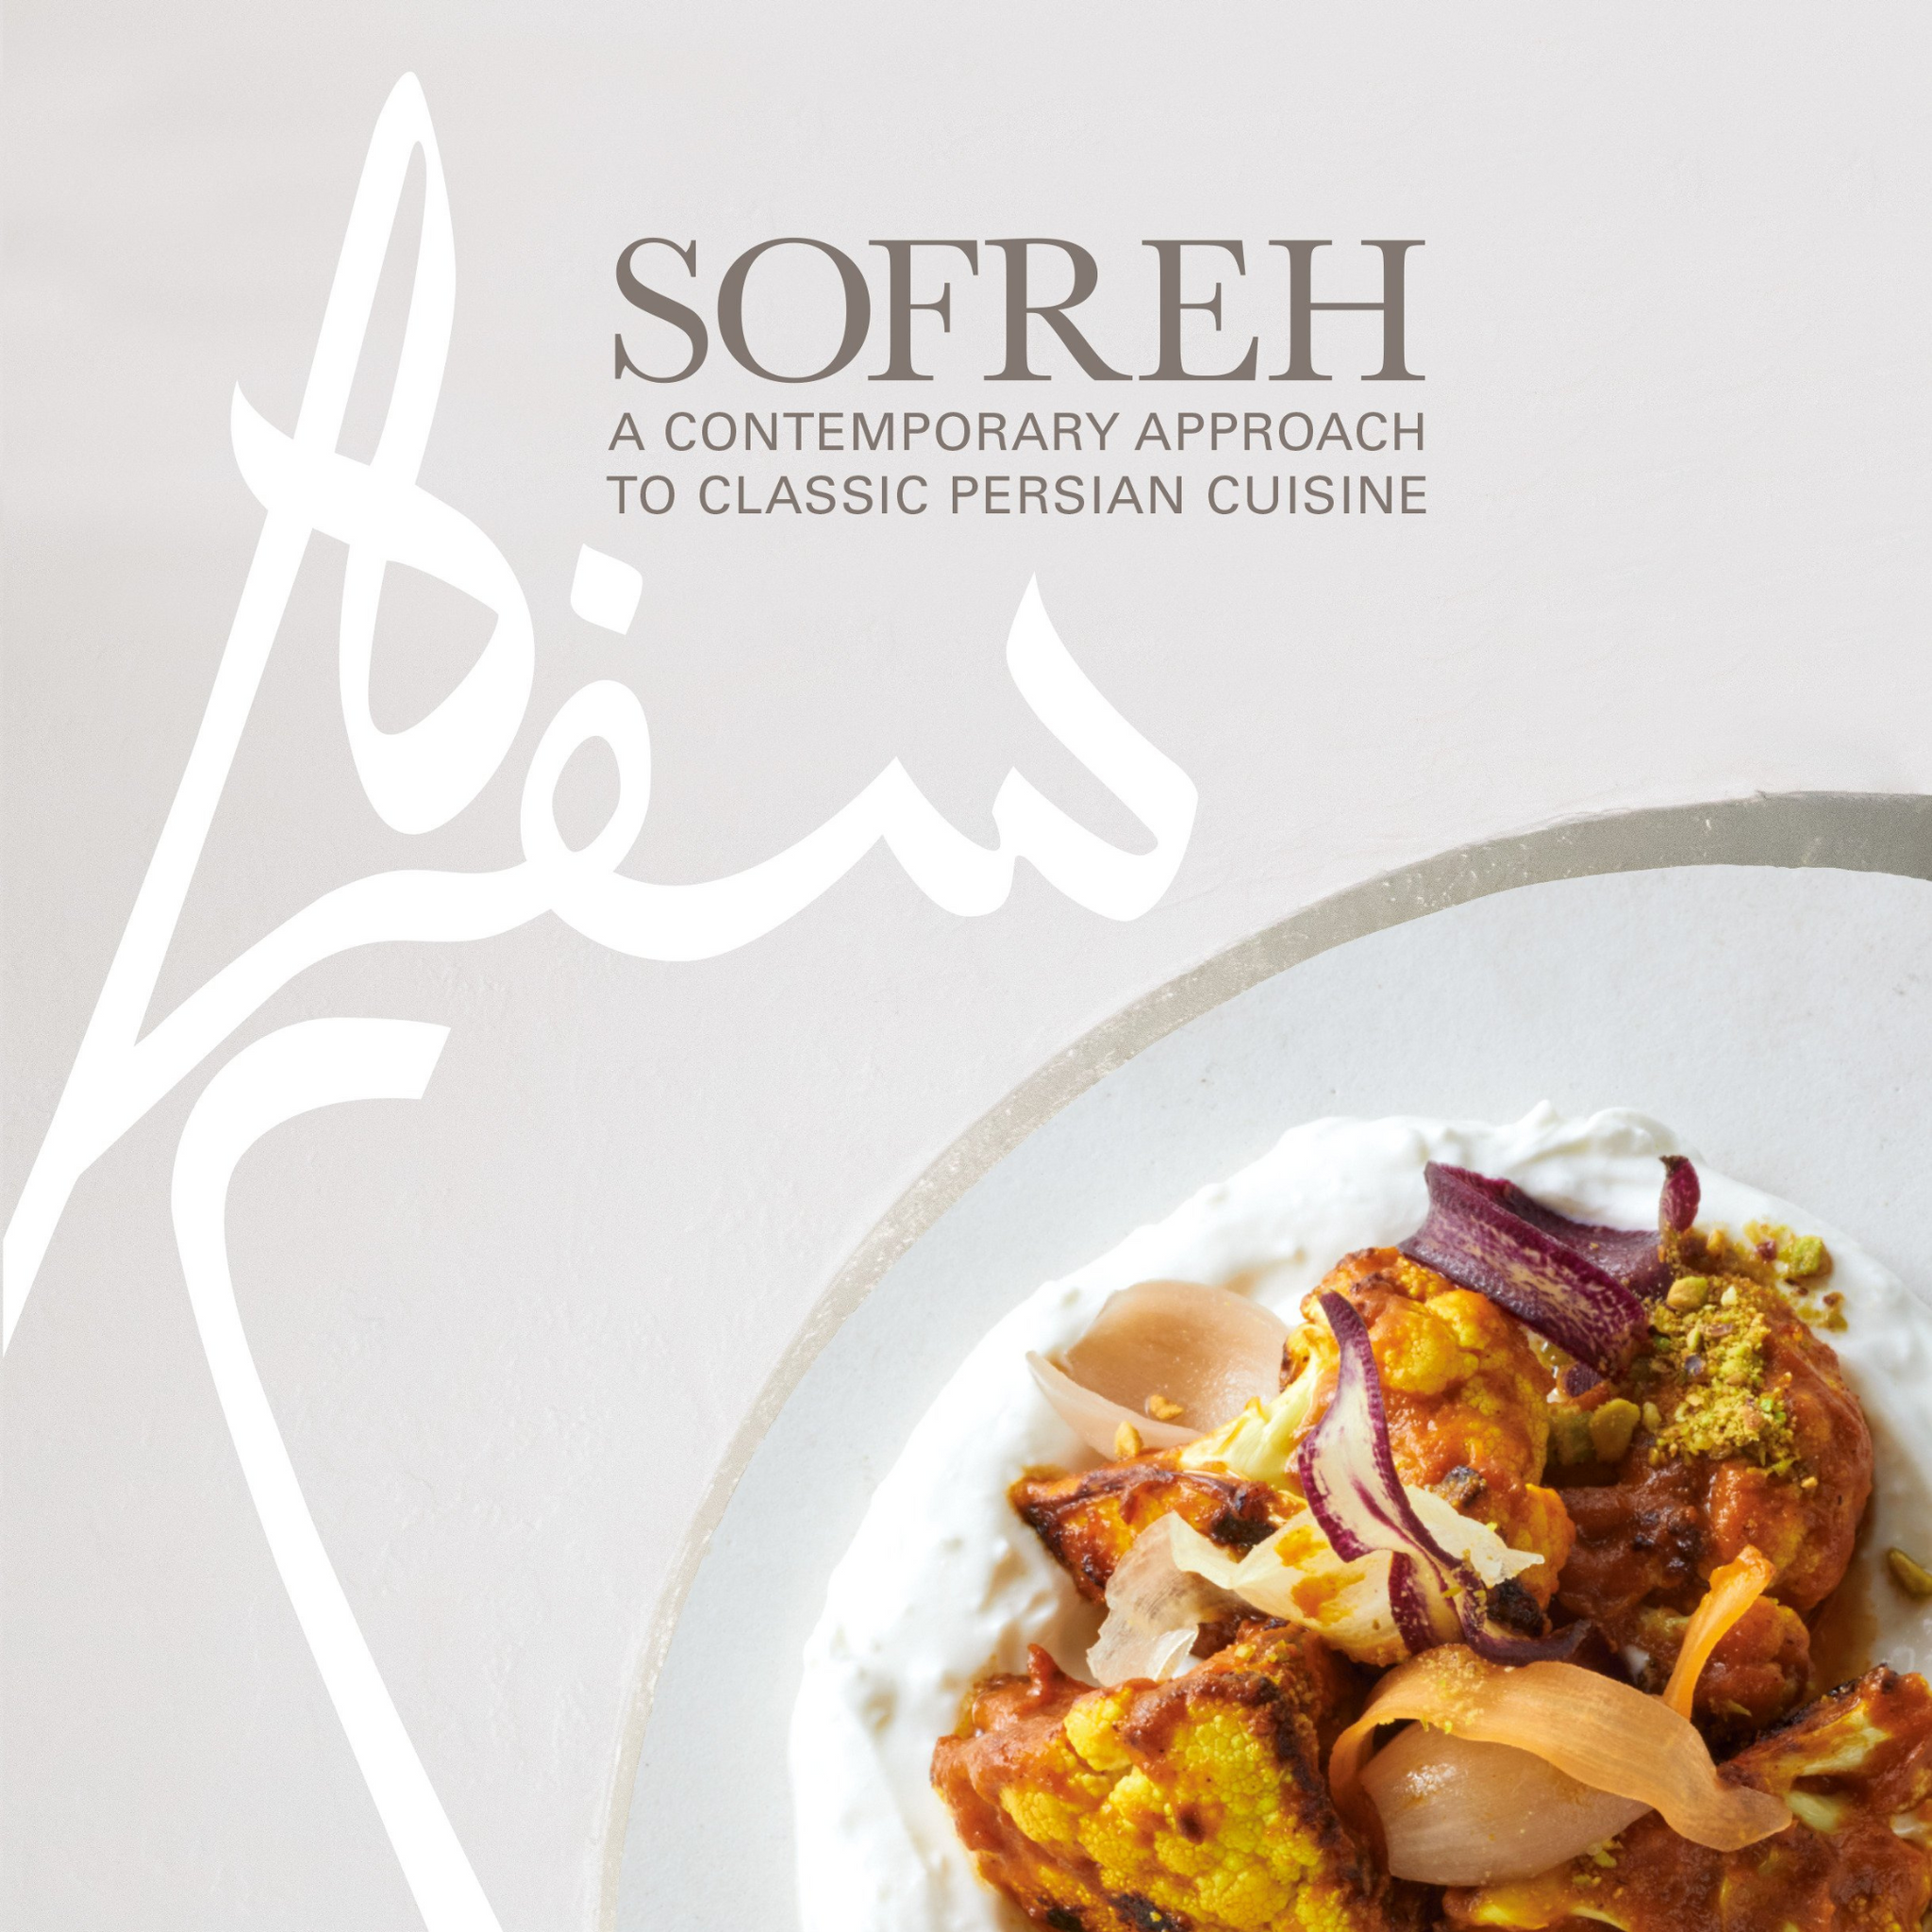 Sofreh: A Contemporary Approach to Classic Persian Cuisine